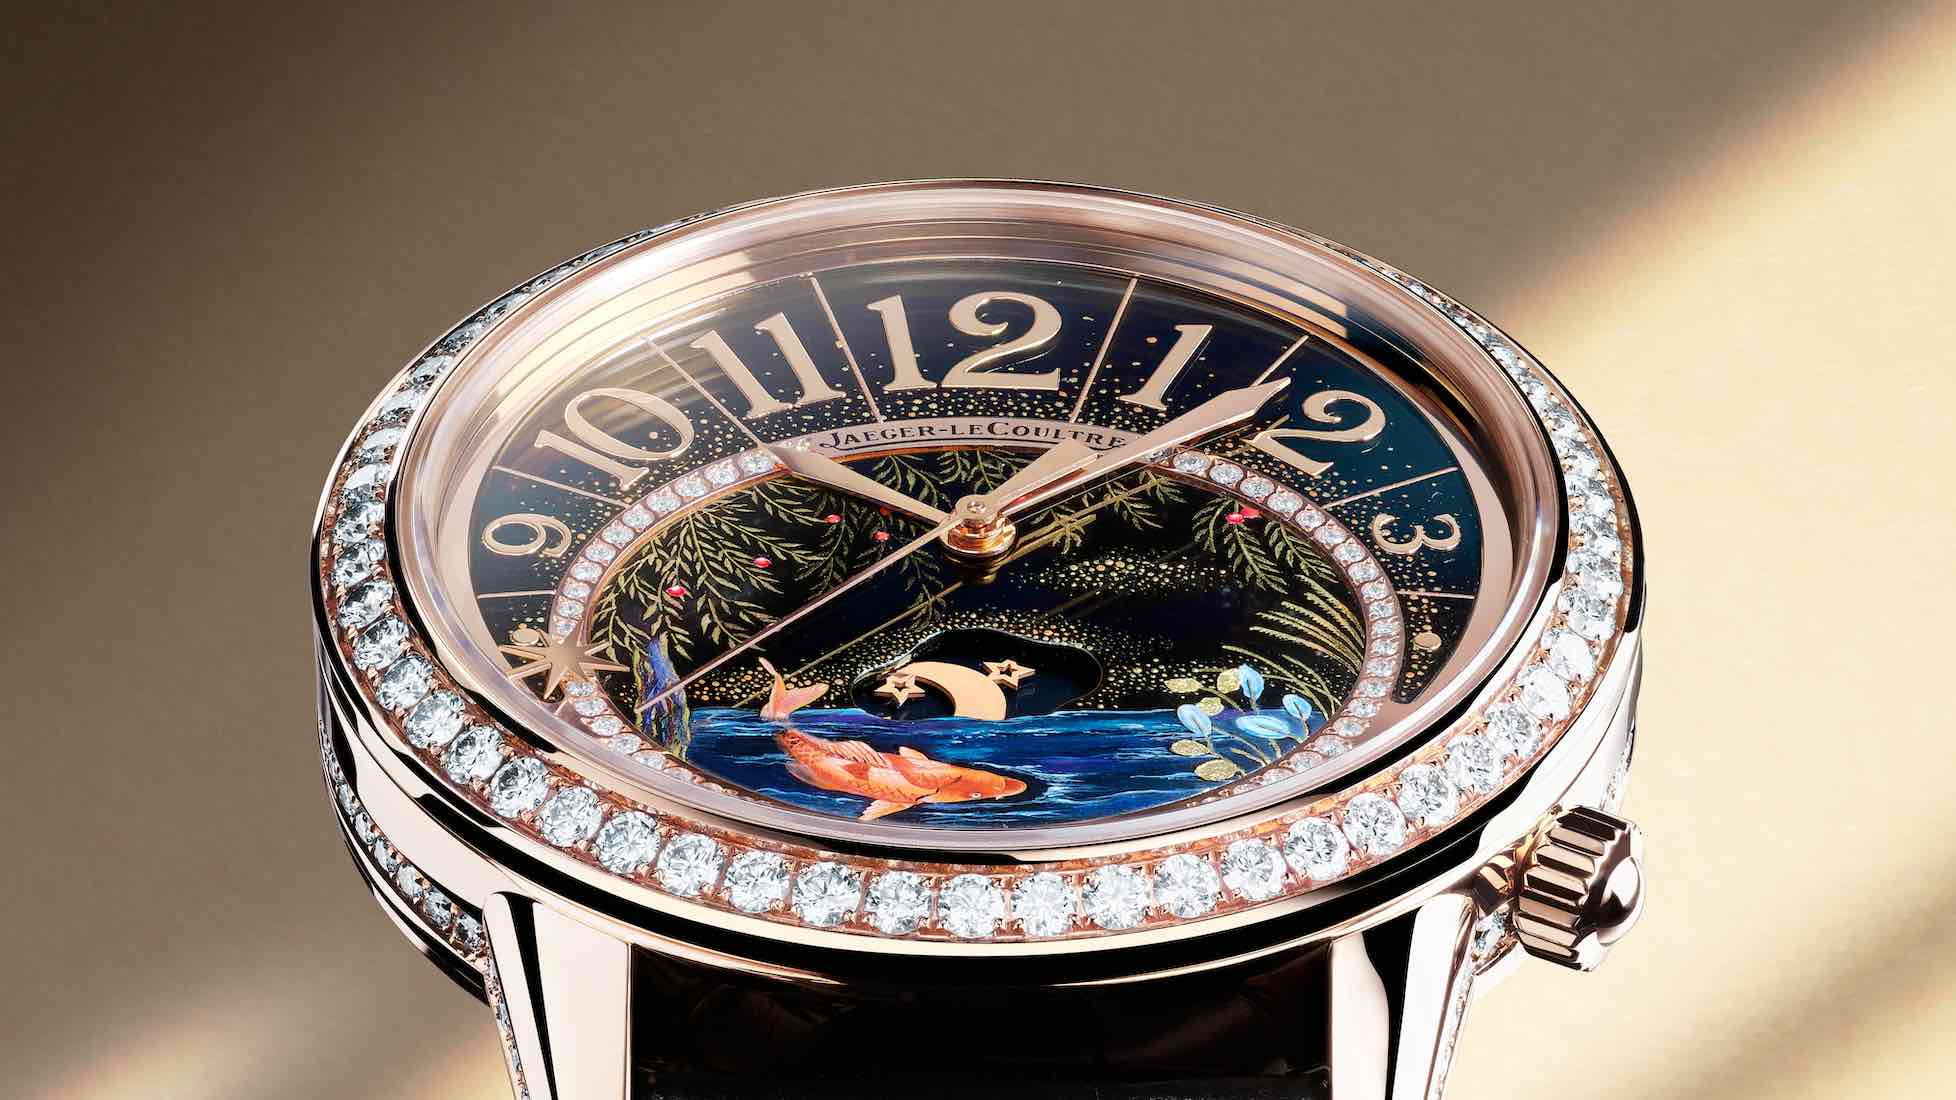 The Jaeger-LeCoultre Rendez-Vous Sonatina 'Peaceful Nature' - Koi model has a miniature painting of the koi fish swimming in a rippling pond, with willow branches over it. 